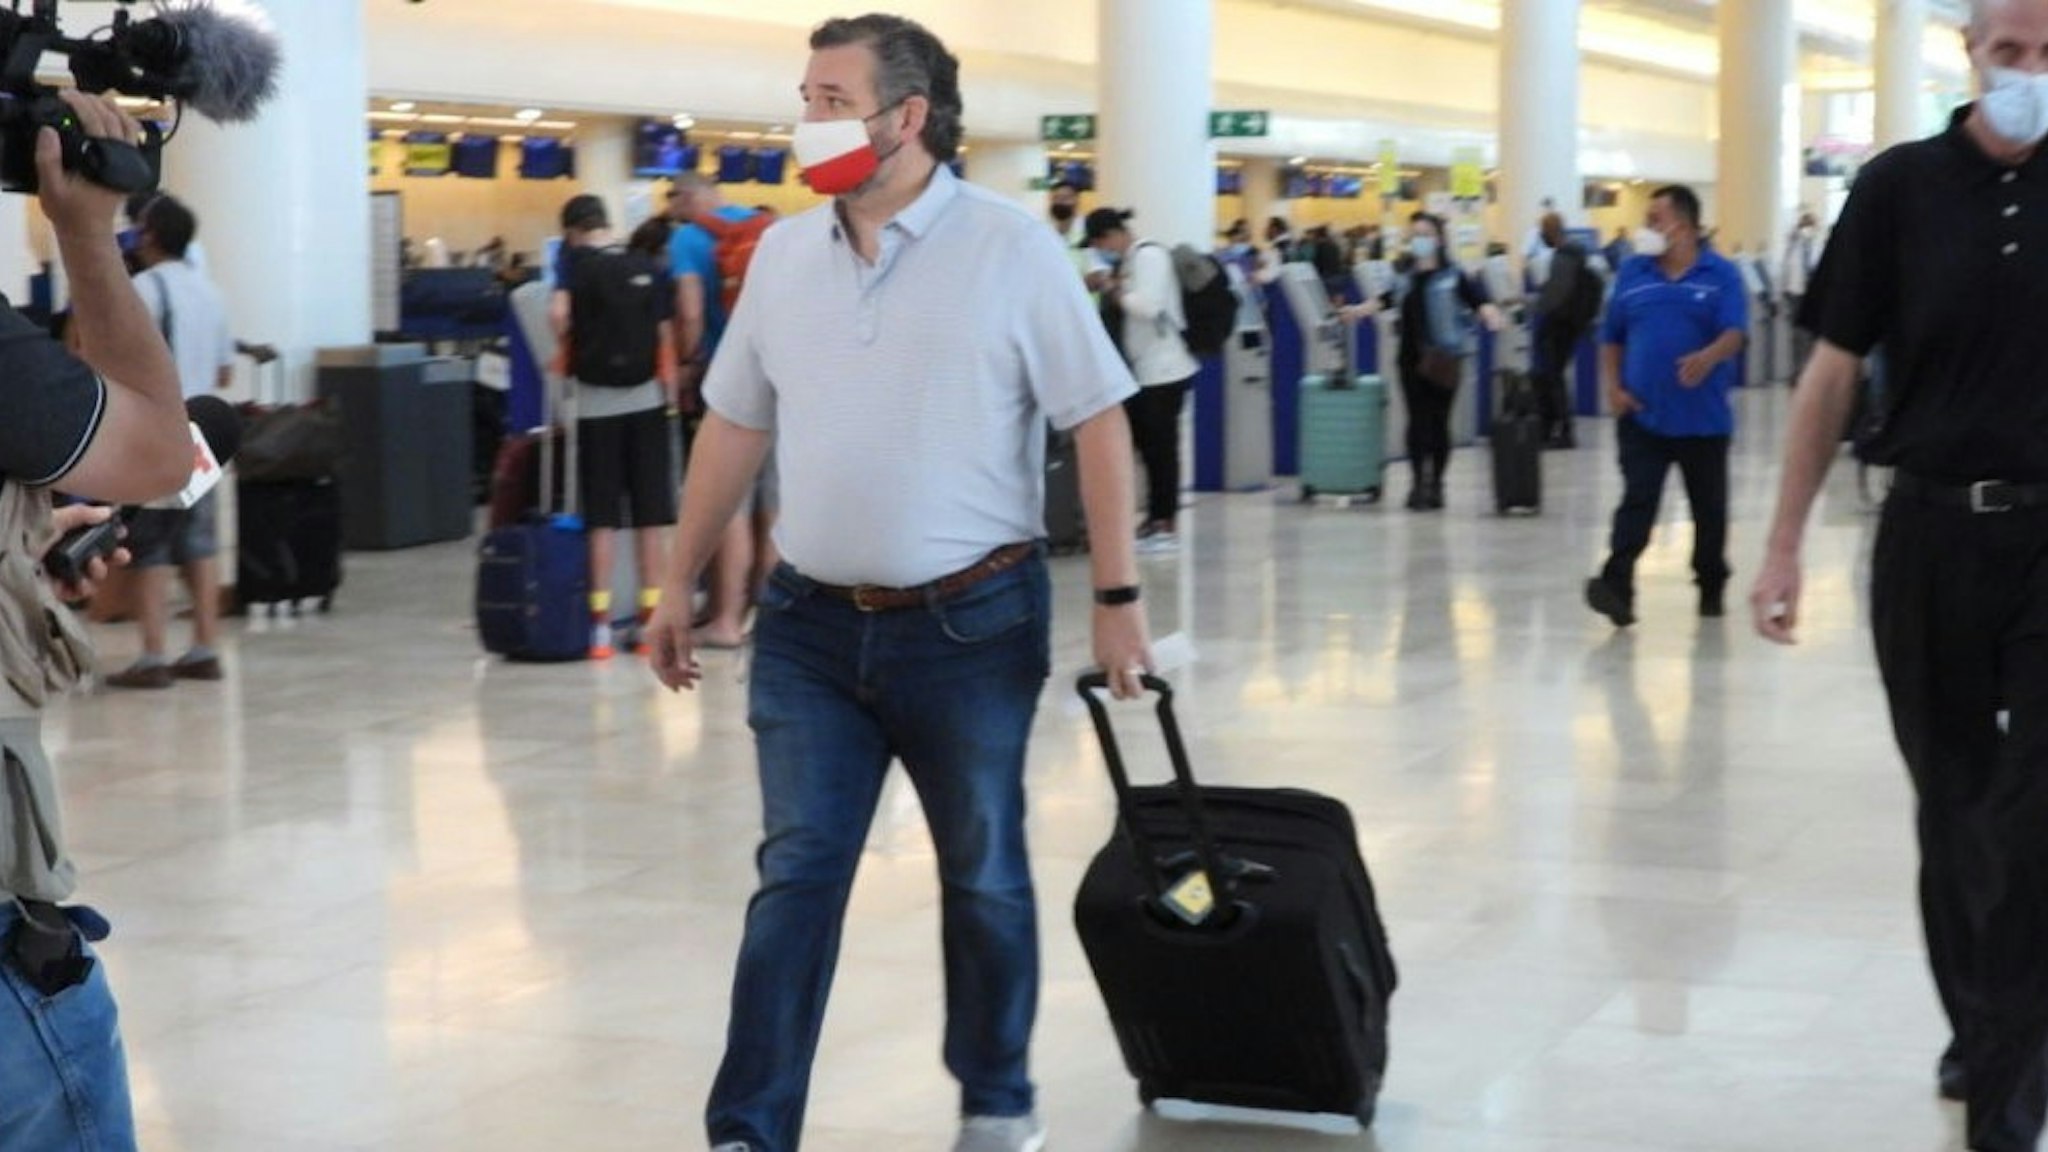 CANCUN, MEXICO - FEBRUARY 18: Sen. Ted Cruz (R-TX) checks in for a flight at Cancun International Airport after a backlash over his Mexican family vacation as his home state of Texas endured a Winter storm on February 18, 2021 in Cancun, Quintana Roo, Mexico. The Republican politician came under fire after leaving for the warm holiday destination as hundreds of thousands of people in the lone star state suffered a loss of power. Reports stated that Cruz was due to catch a flight back to Ho